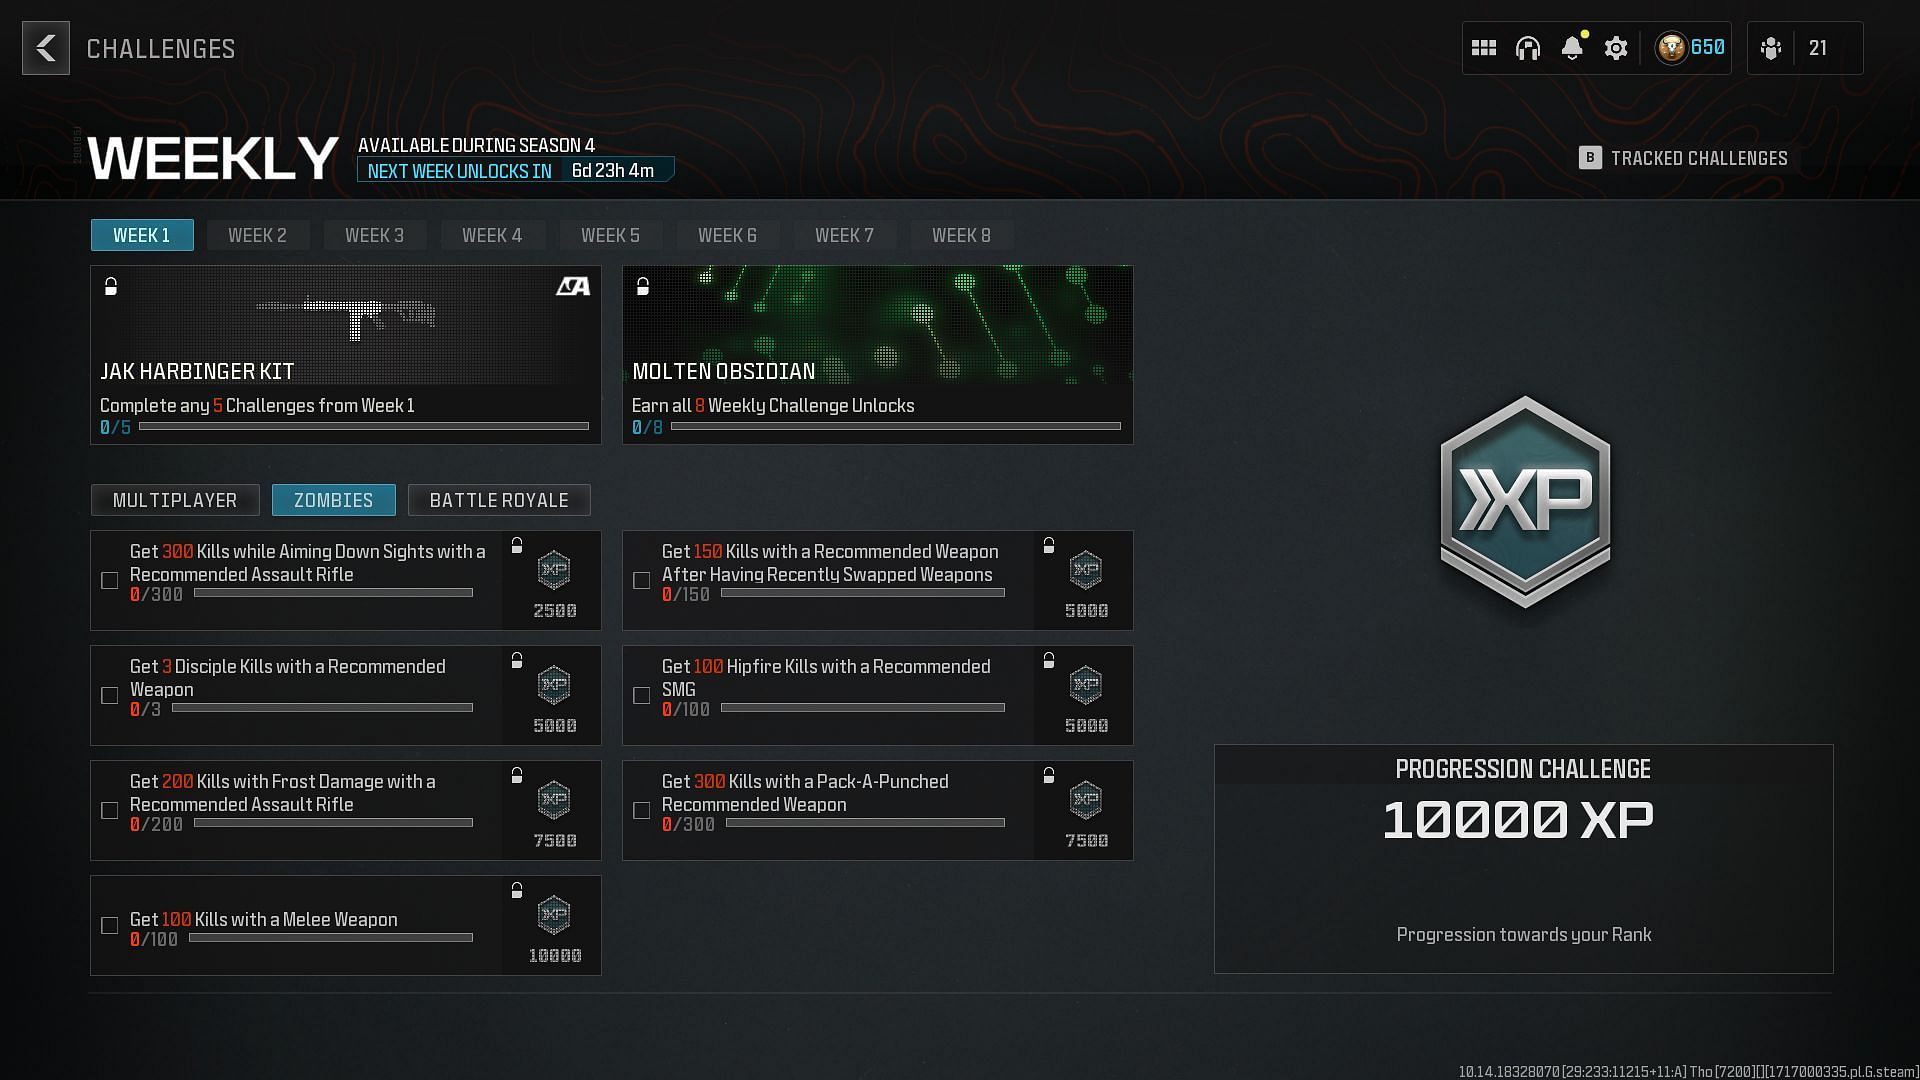 All MW3 Zombies Season 4 Week 1 challenges and rewards (Image via Activision)